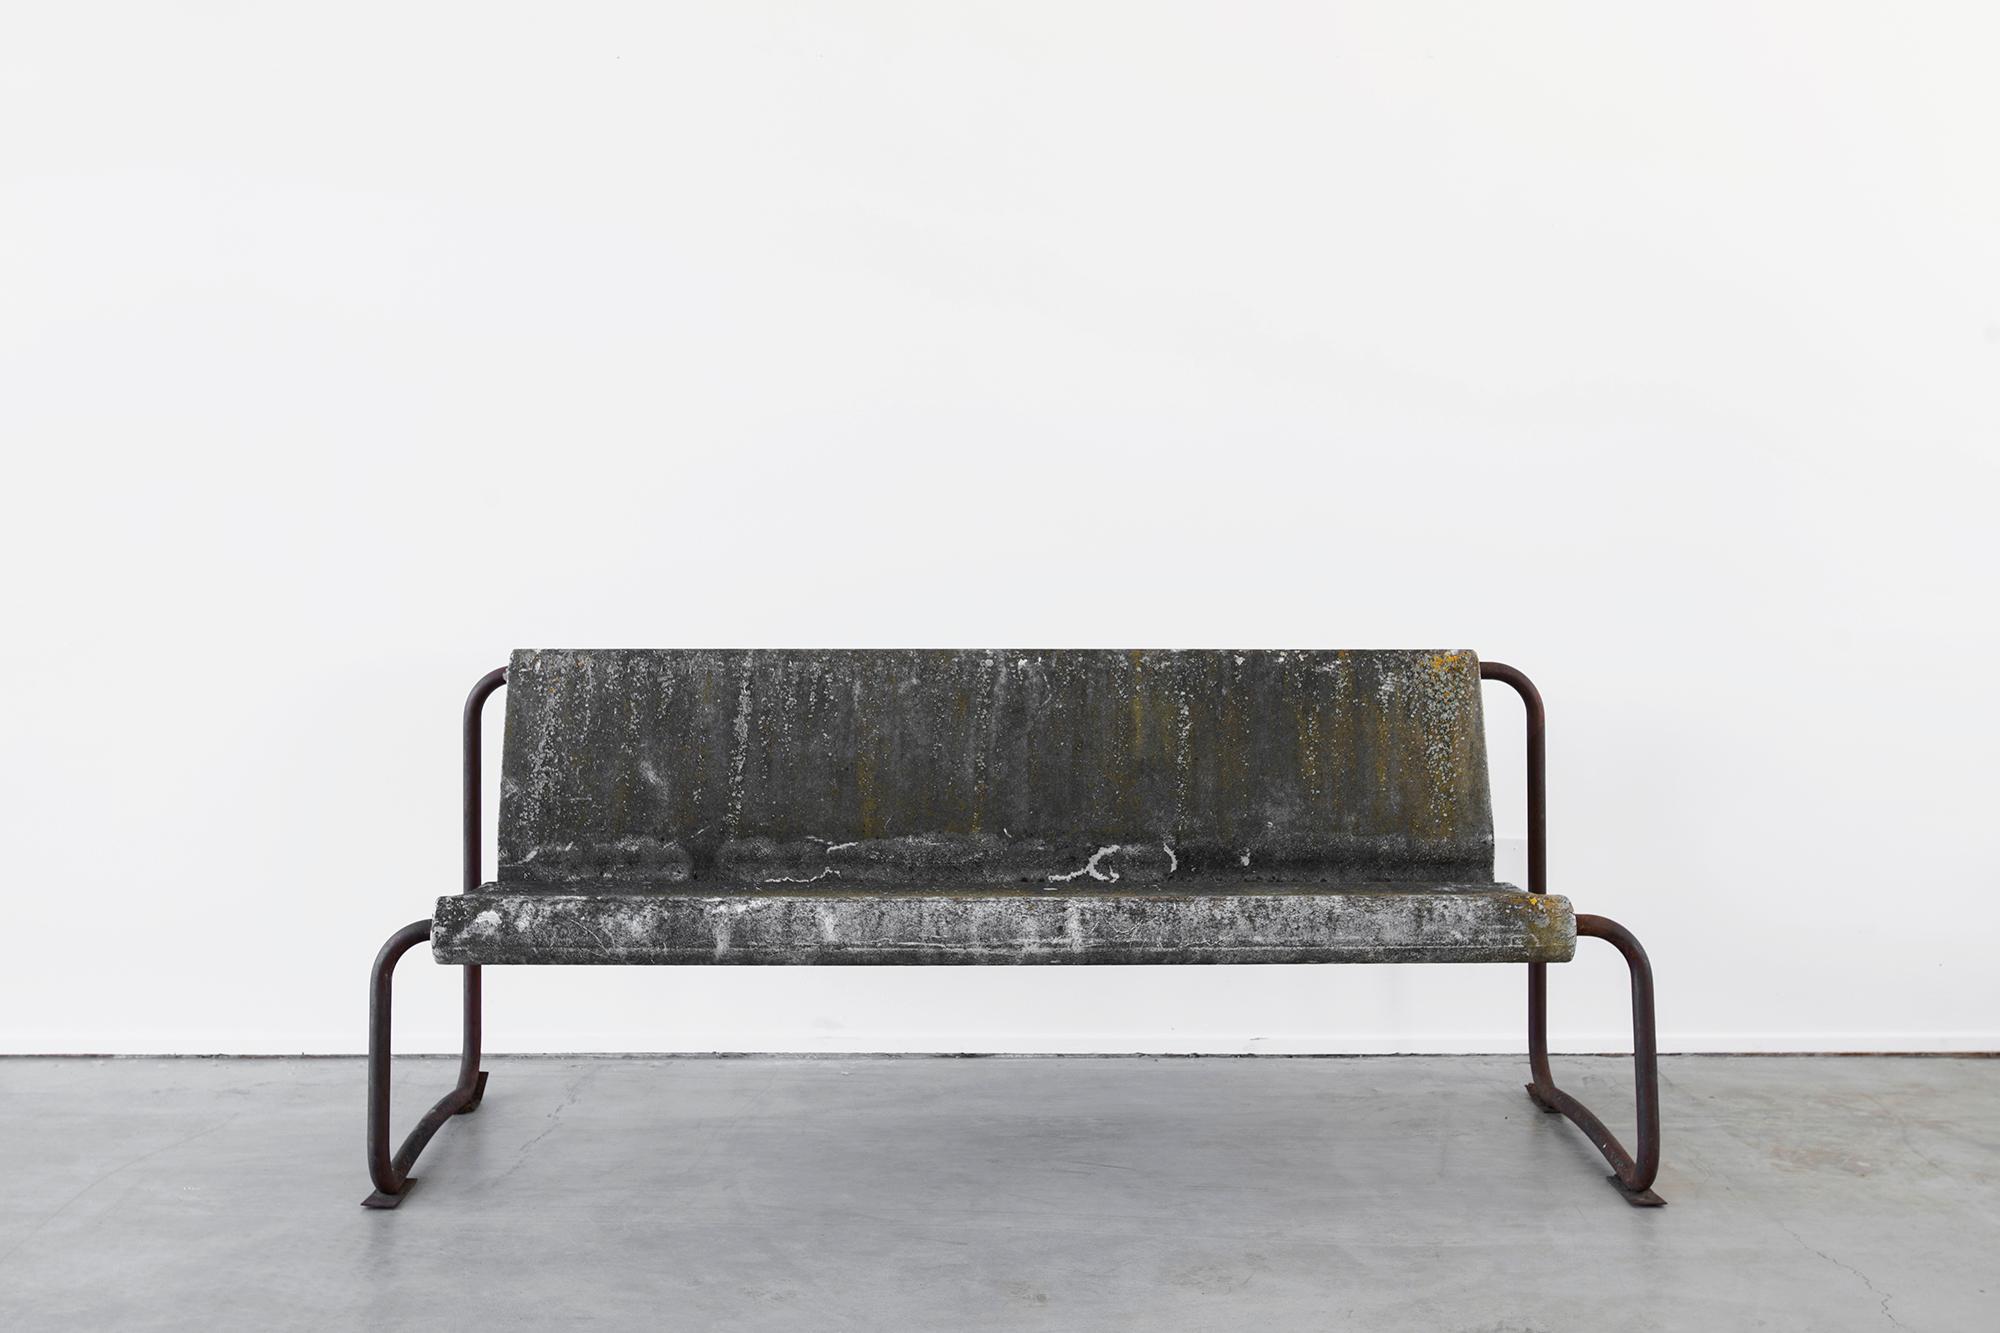 Fantastic concrete floating bench by Swiss Architect Willy Guhl.
Iron frame with great patina throughout.